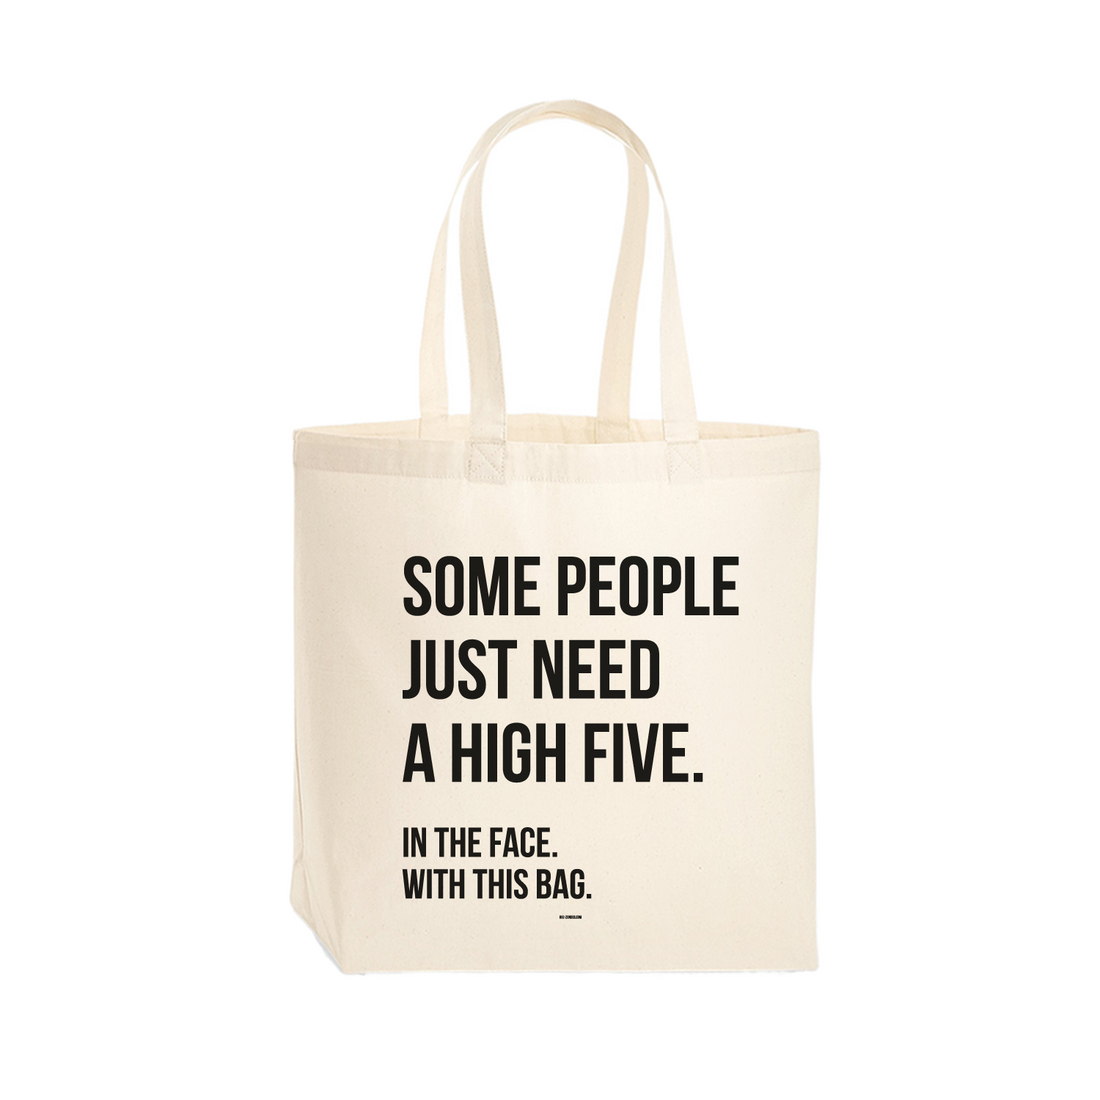 Katoenen tas - Some people just need a high five in the face with this bag